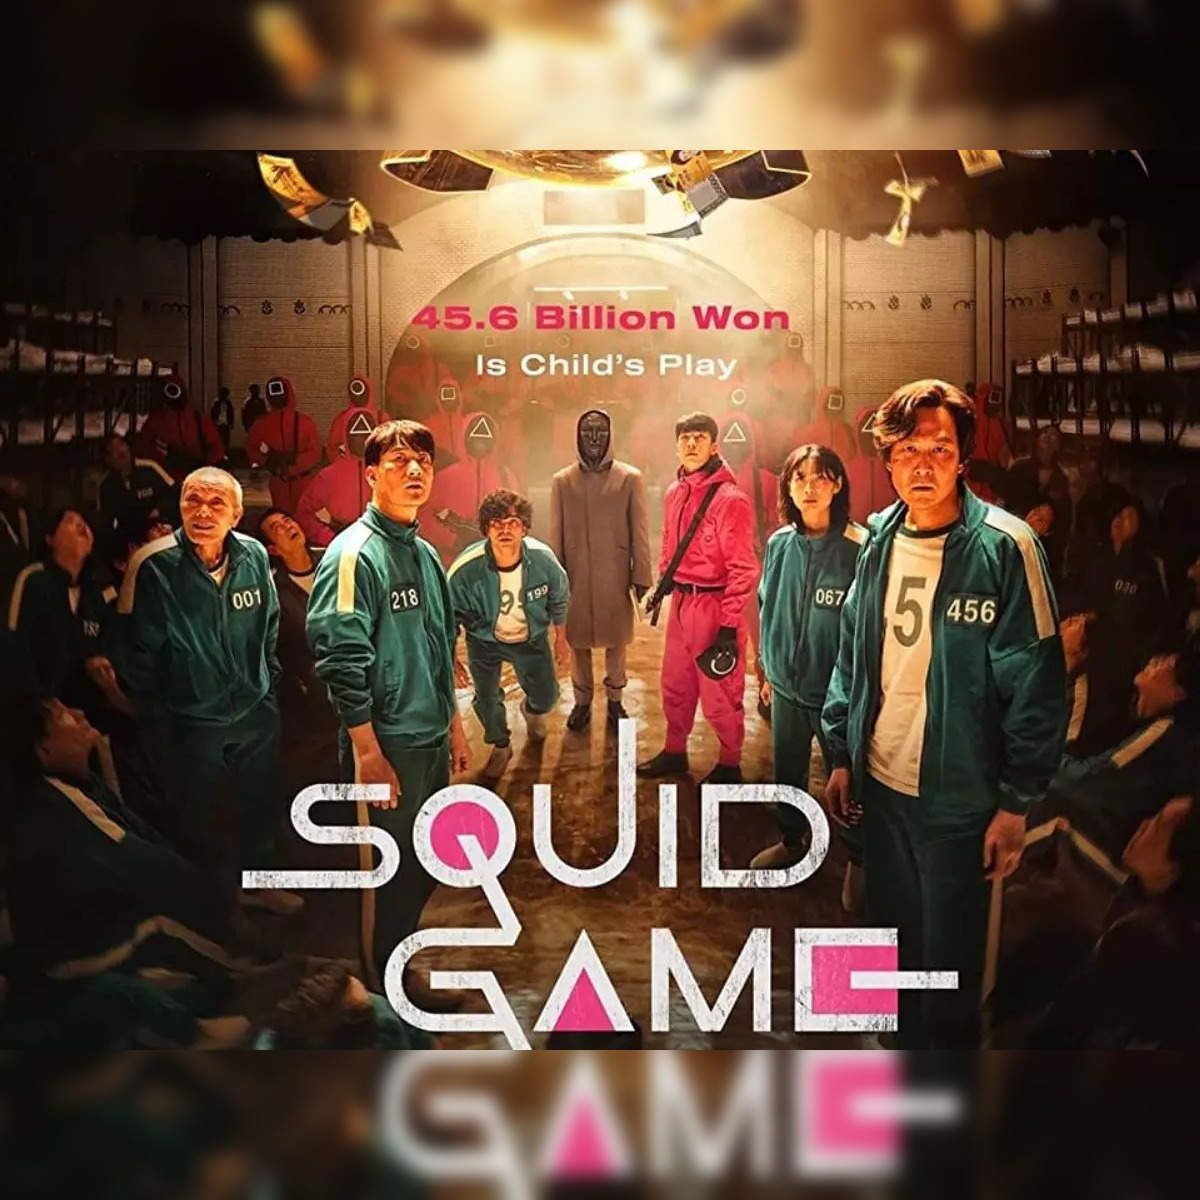 When the release date of Squid Game: The Challenge final episode is